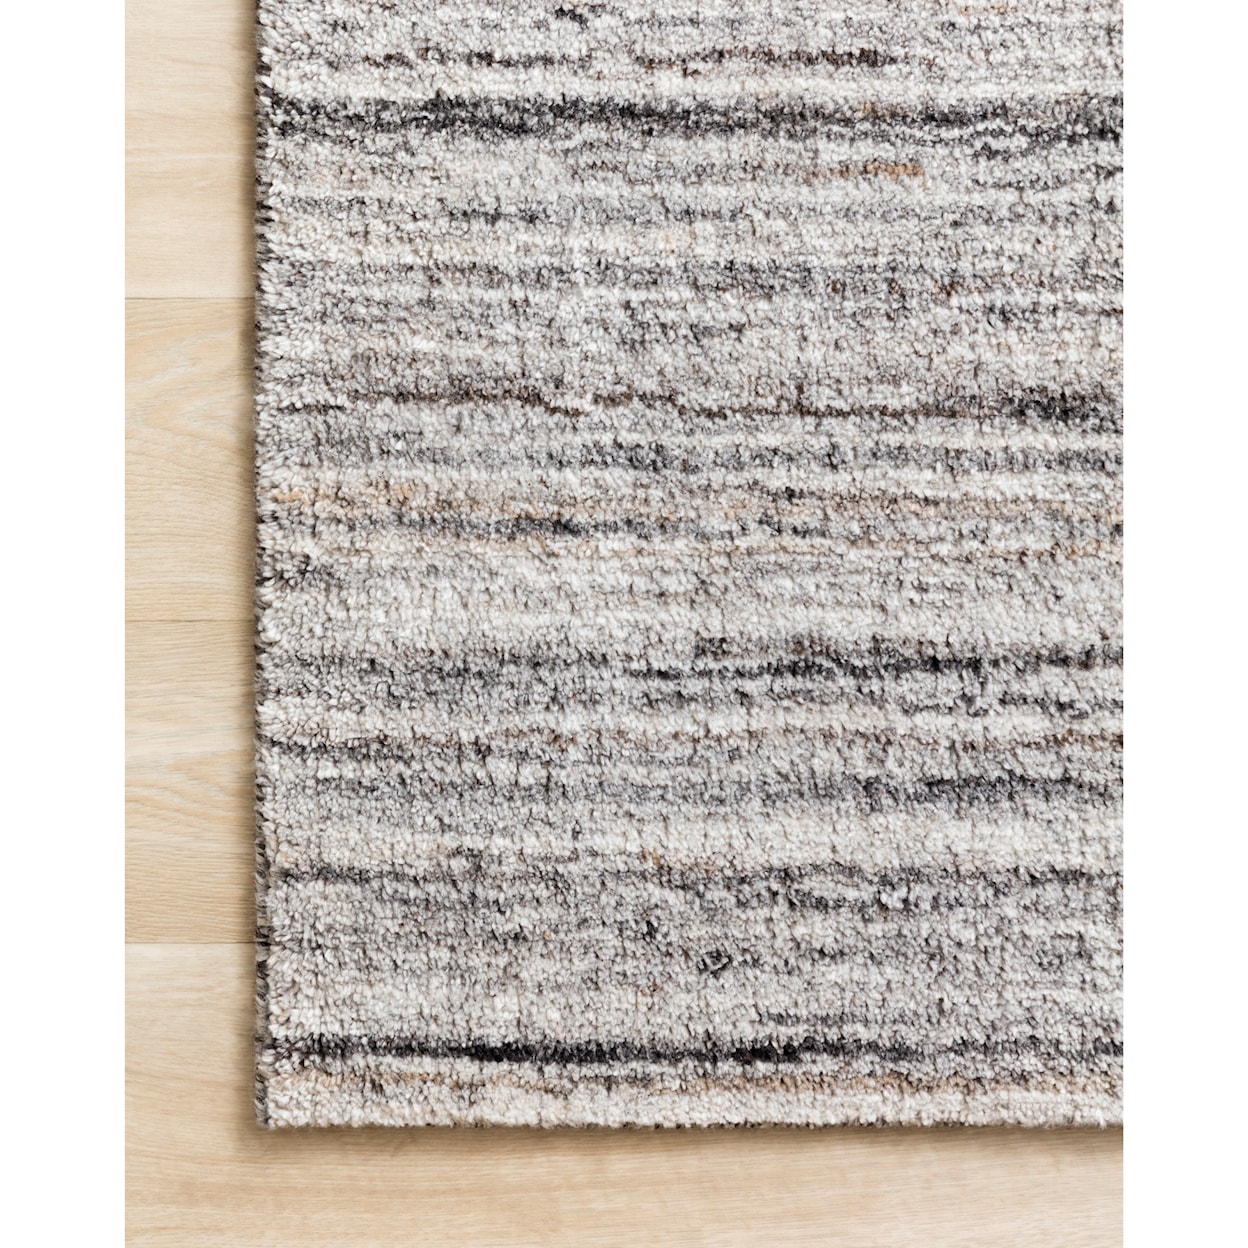 Reeds Rugs Brandt 4'0" x 6'0" Silver / Stone Rug